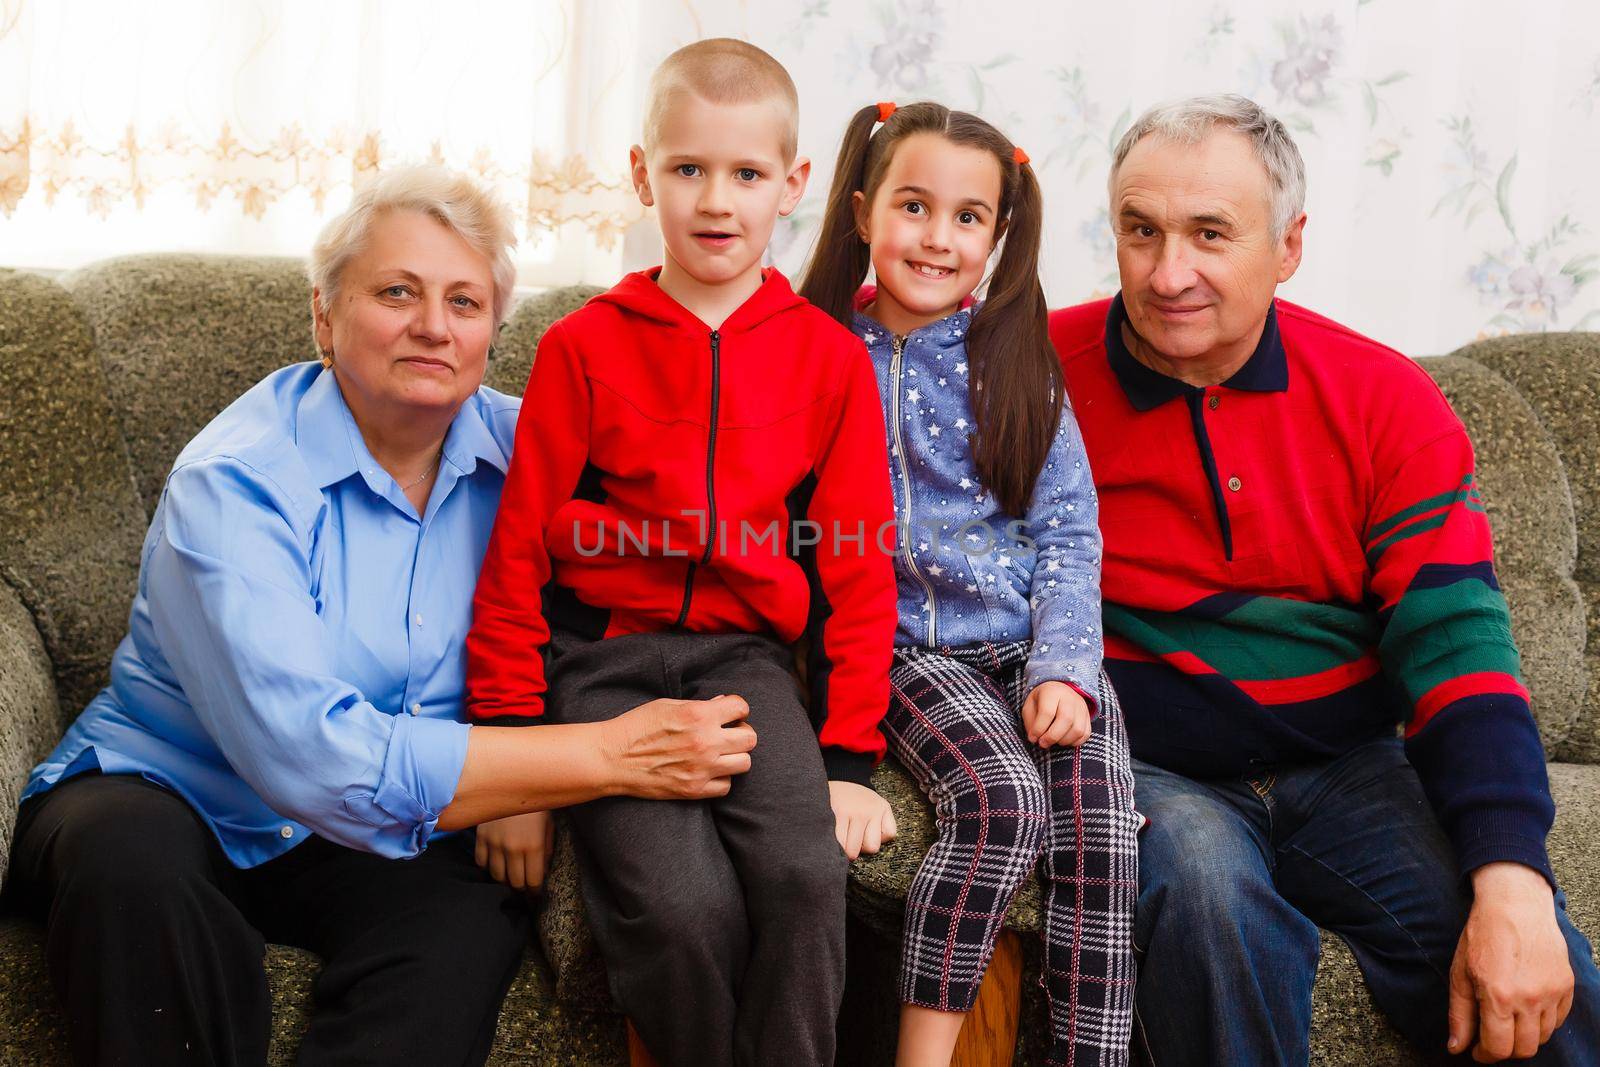 Grandparents and their young grandchildren relaxing at home by Andelov13